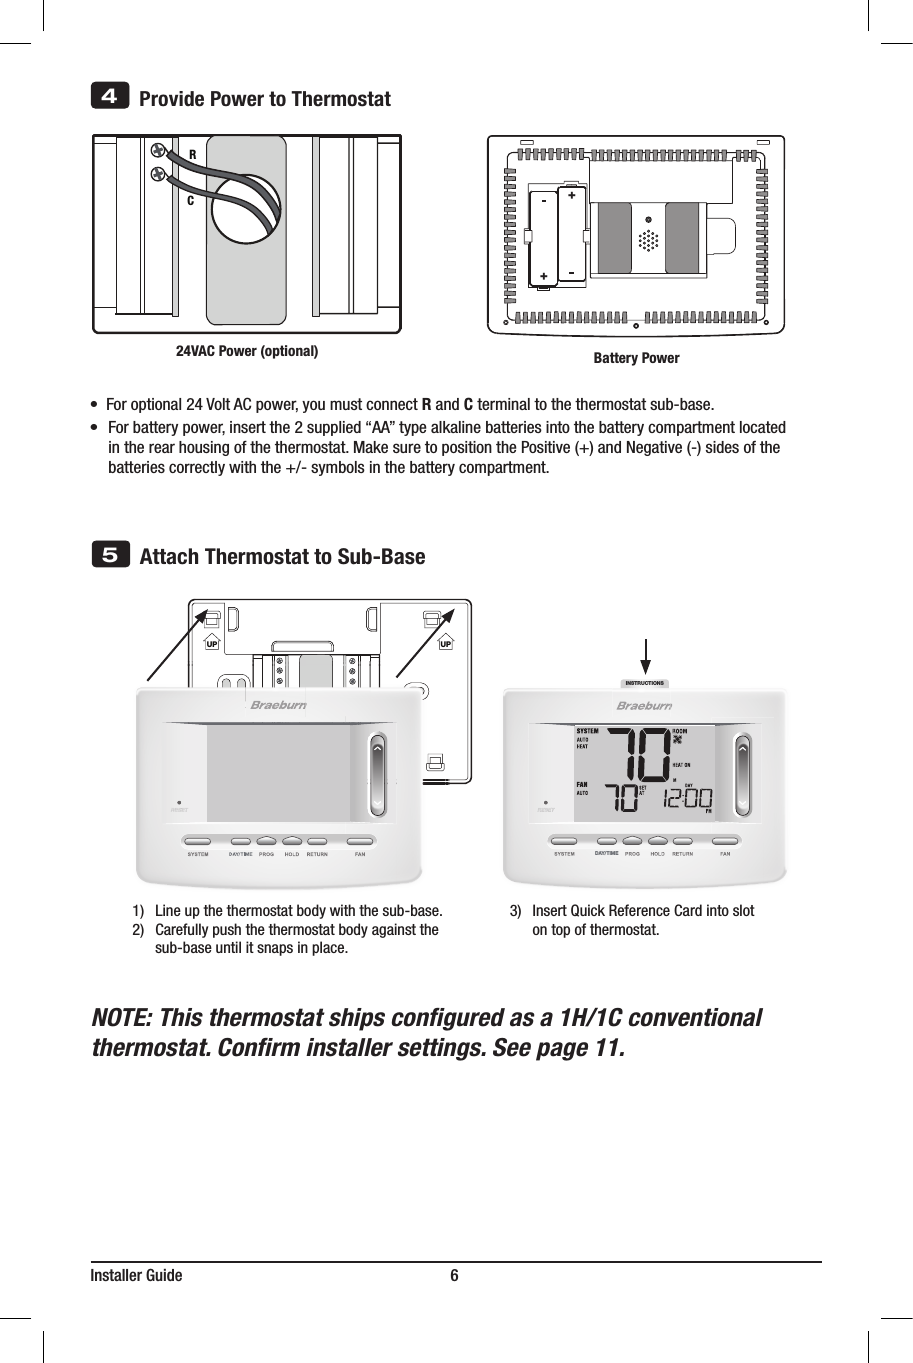 INSTRUCTIONSDAY/TIMEInstaller Guide                                                                   6NOTE: This thermostat ships congured as a 1H/1C conventional thermostat. Conrm installer settings. See page 11.UP UP5Attach Thermostat to Sub-Base3) InsertQuickReferenceCardintoslot ontopofthermostat.1) Lineupthethermostatbodywiththesub-base.2) Carefullypushthethermostatbodyagainstthe sub-baseuntilitsnapsinplace.       Provide Power to ThermostatRC24VAC Power (optional)4   ++•  Foroptional24VoltACpower,youmustconnectR and C terminal to the thermostat sub-base.•Forbatterypower,insertthe2supplied“AA”typealkalinebatteriesintothebatterycompartmentlocated intherearhousingofthethermostat.MakesuretopositionthePositive(+)andNegative(-)sidesofthe batteriescorrectlywiththe+/-symbolsinthebatterycompartment.Battery Power